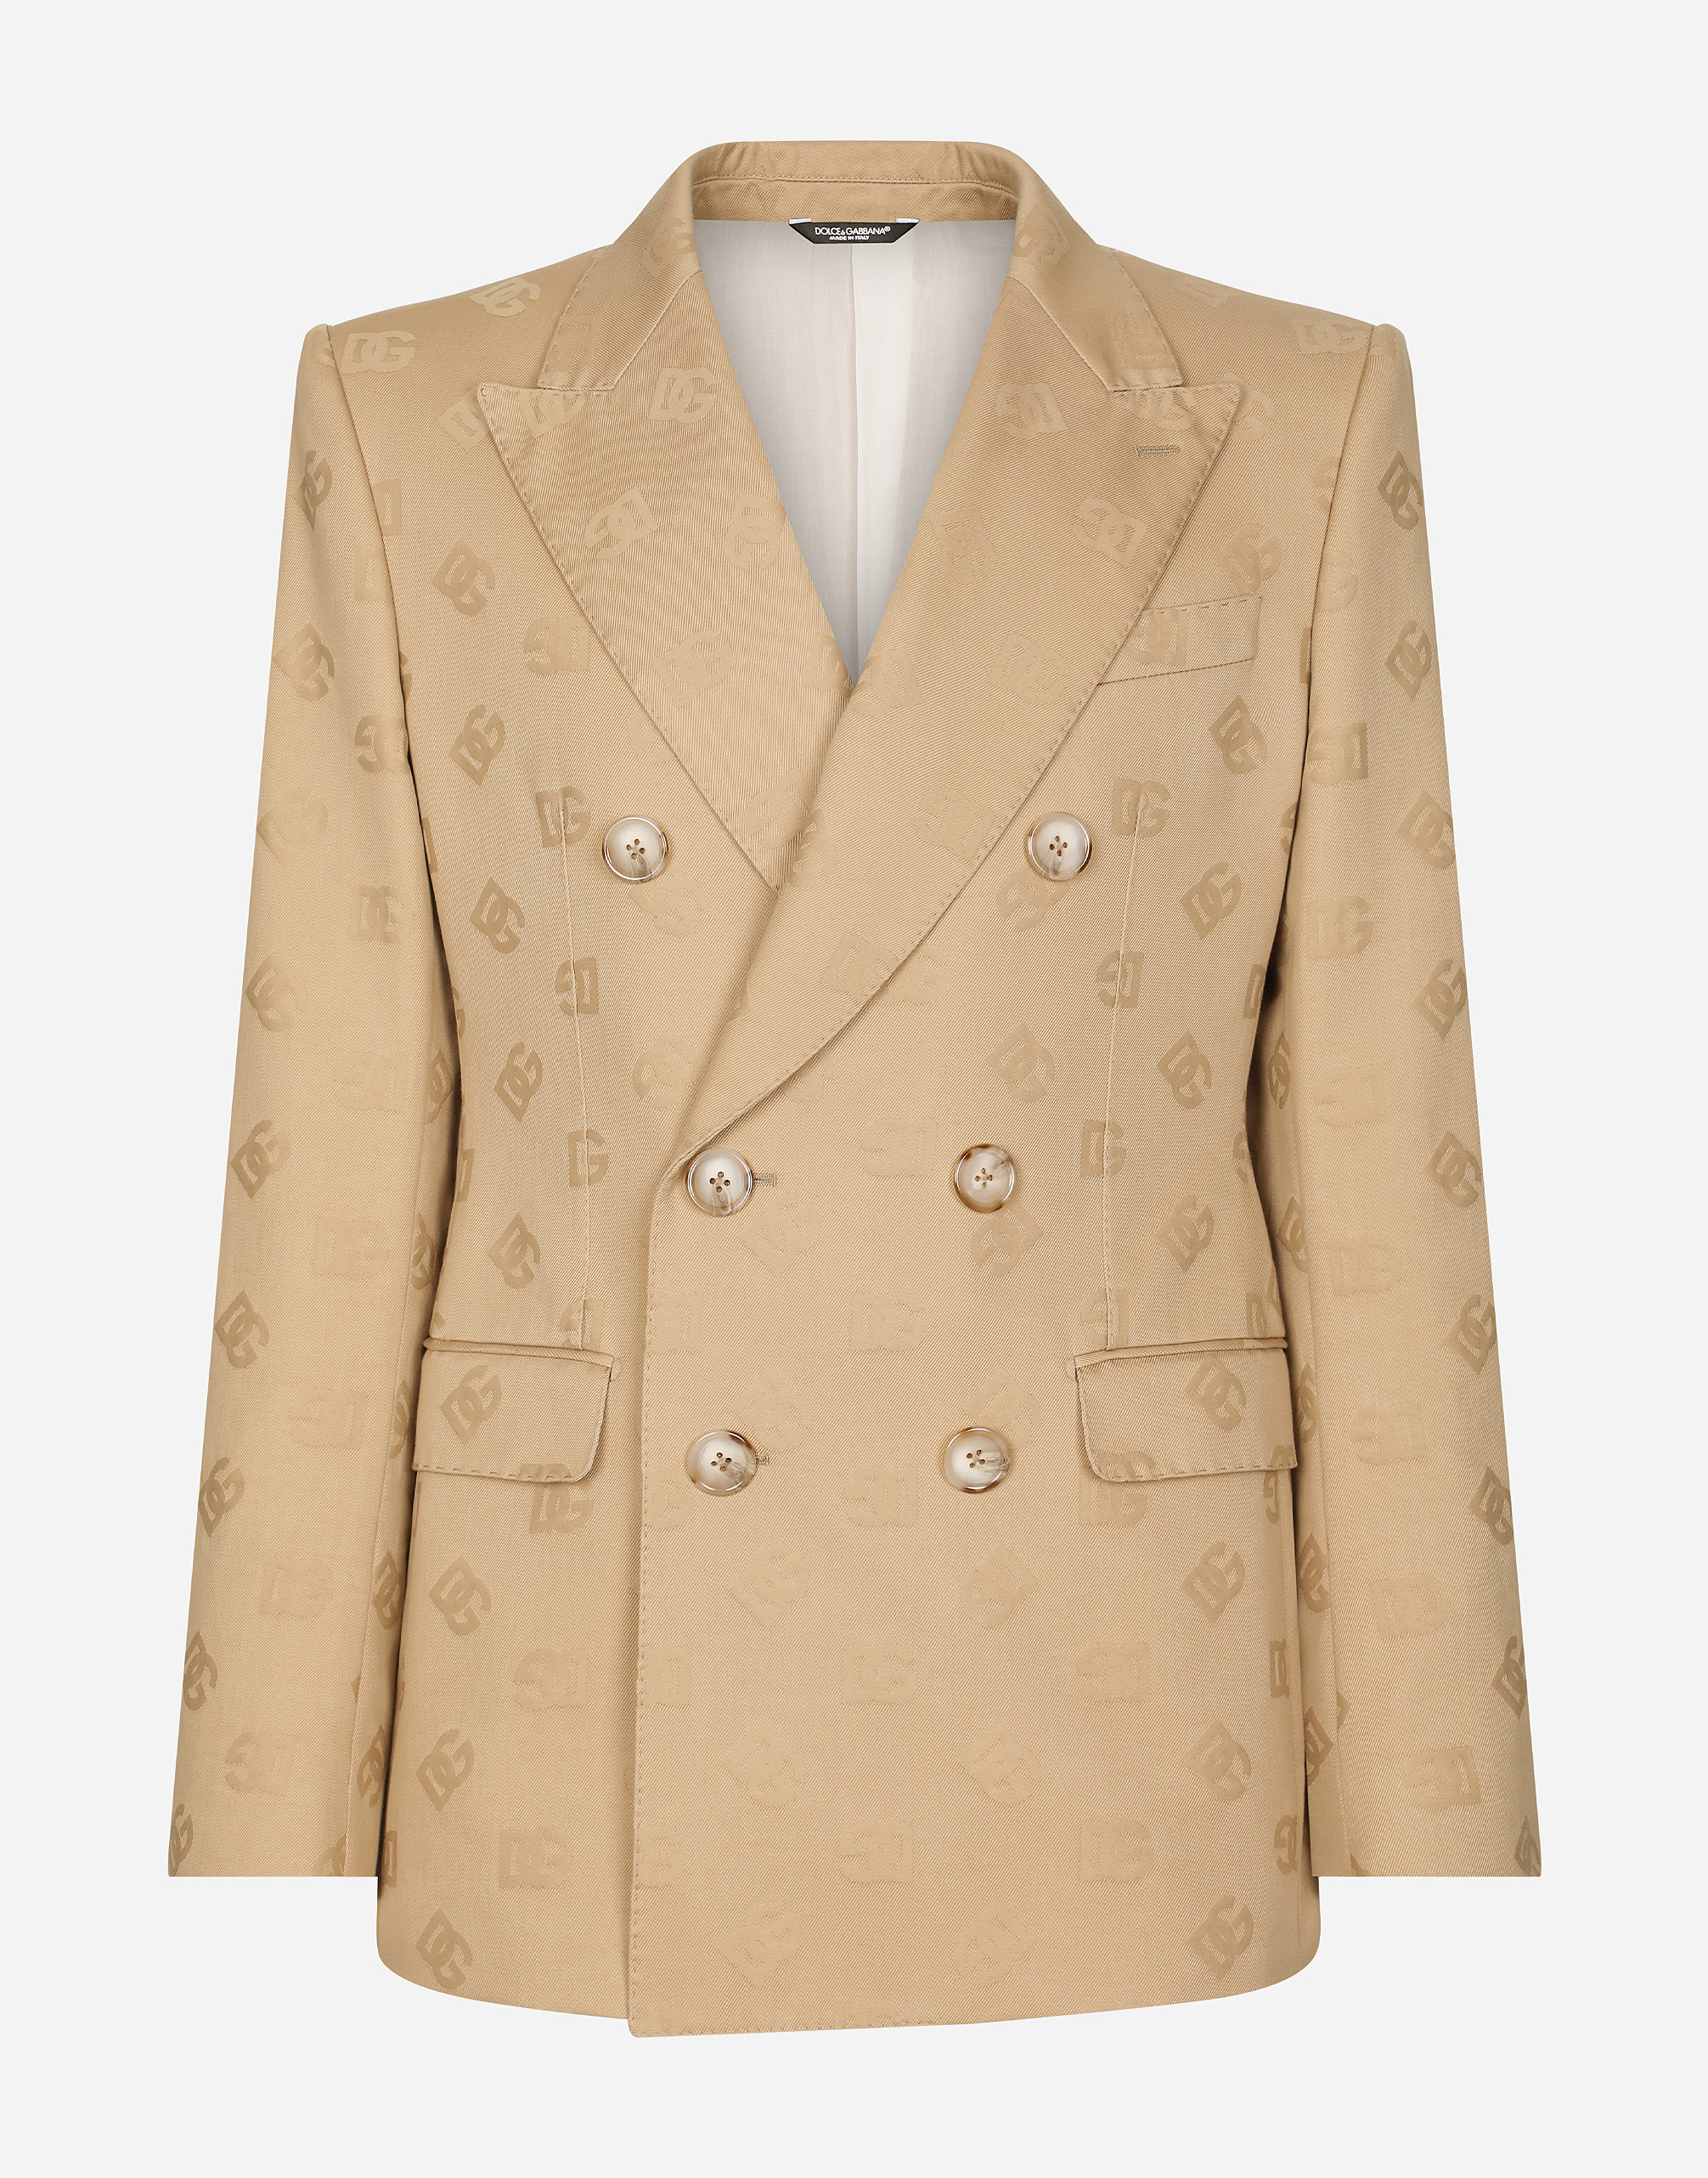 Dolce & Gabbana Tailored Double-breasted Cotton Jacket With Jacquard Dg Details In Dark Beige